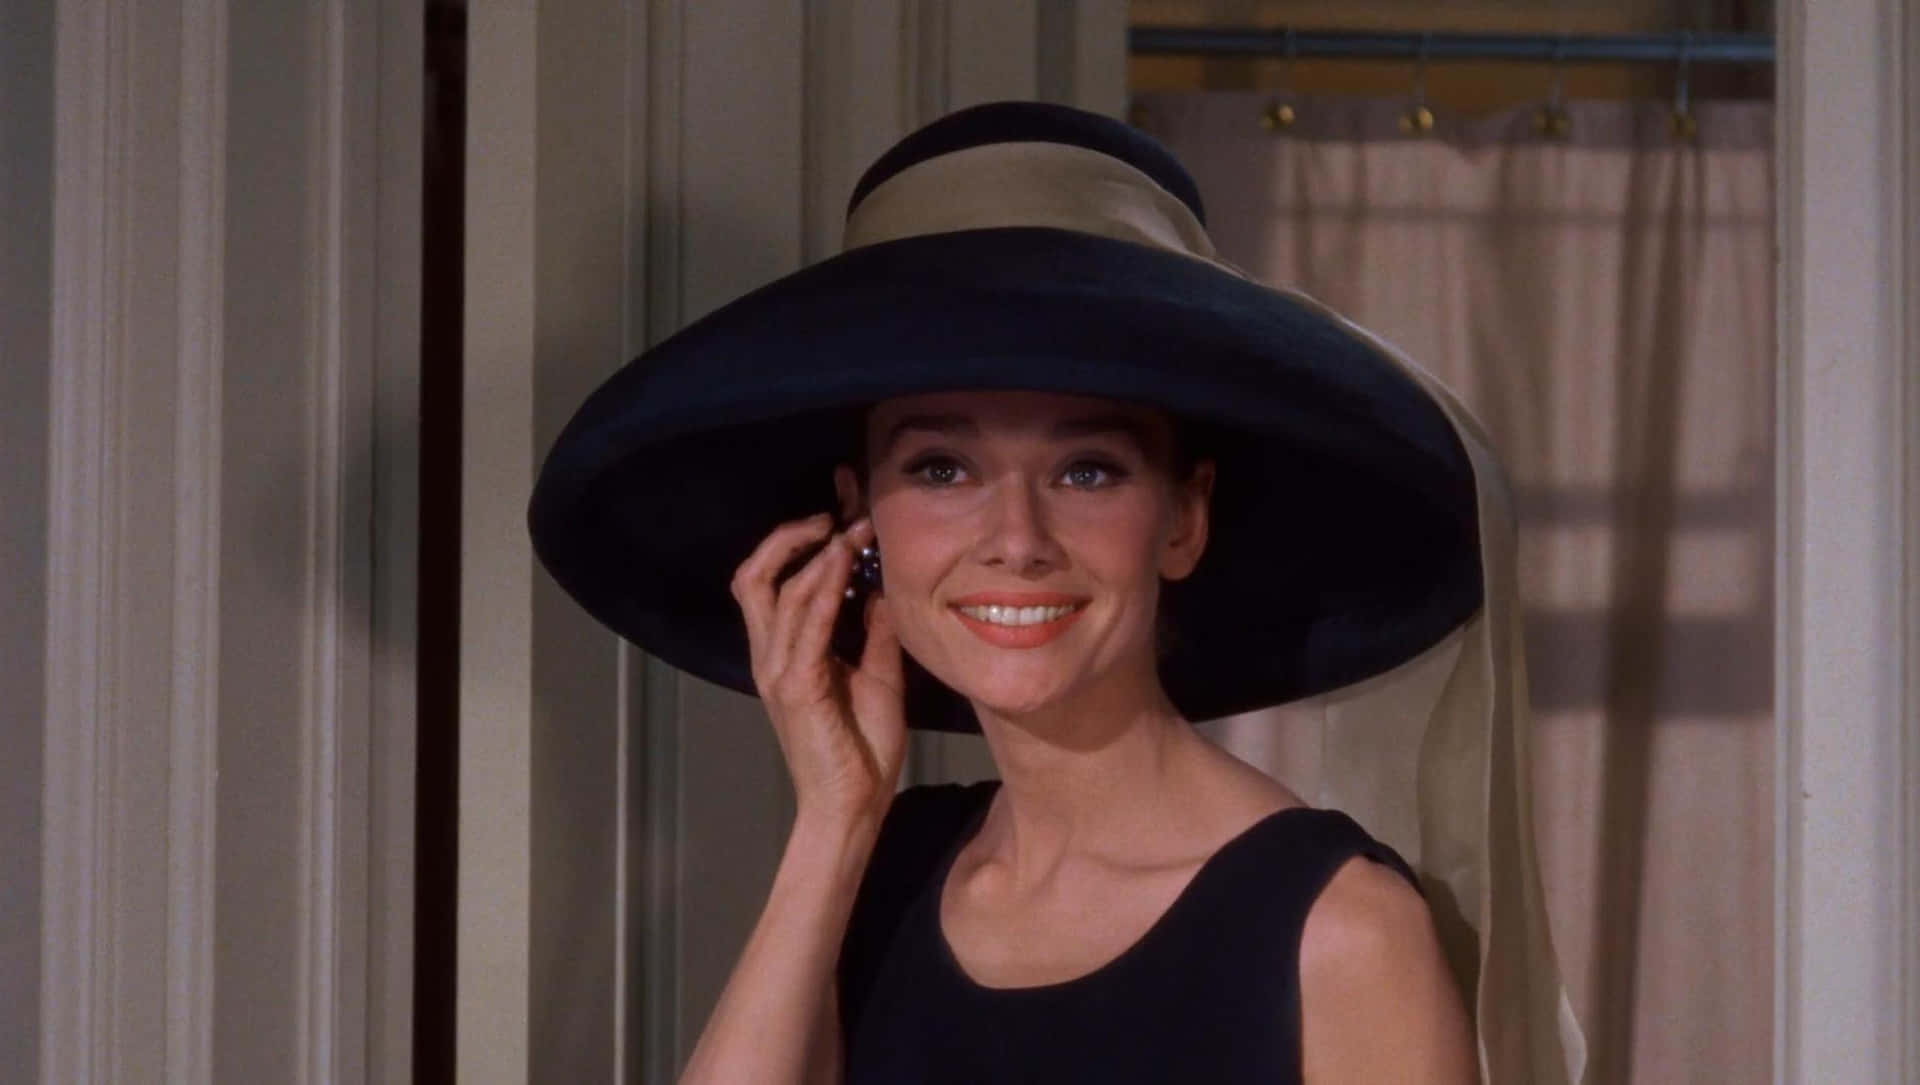 Audrey Hepburn in the Iconic Breakfast at Tiffany's Wallpaper